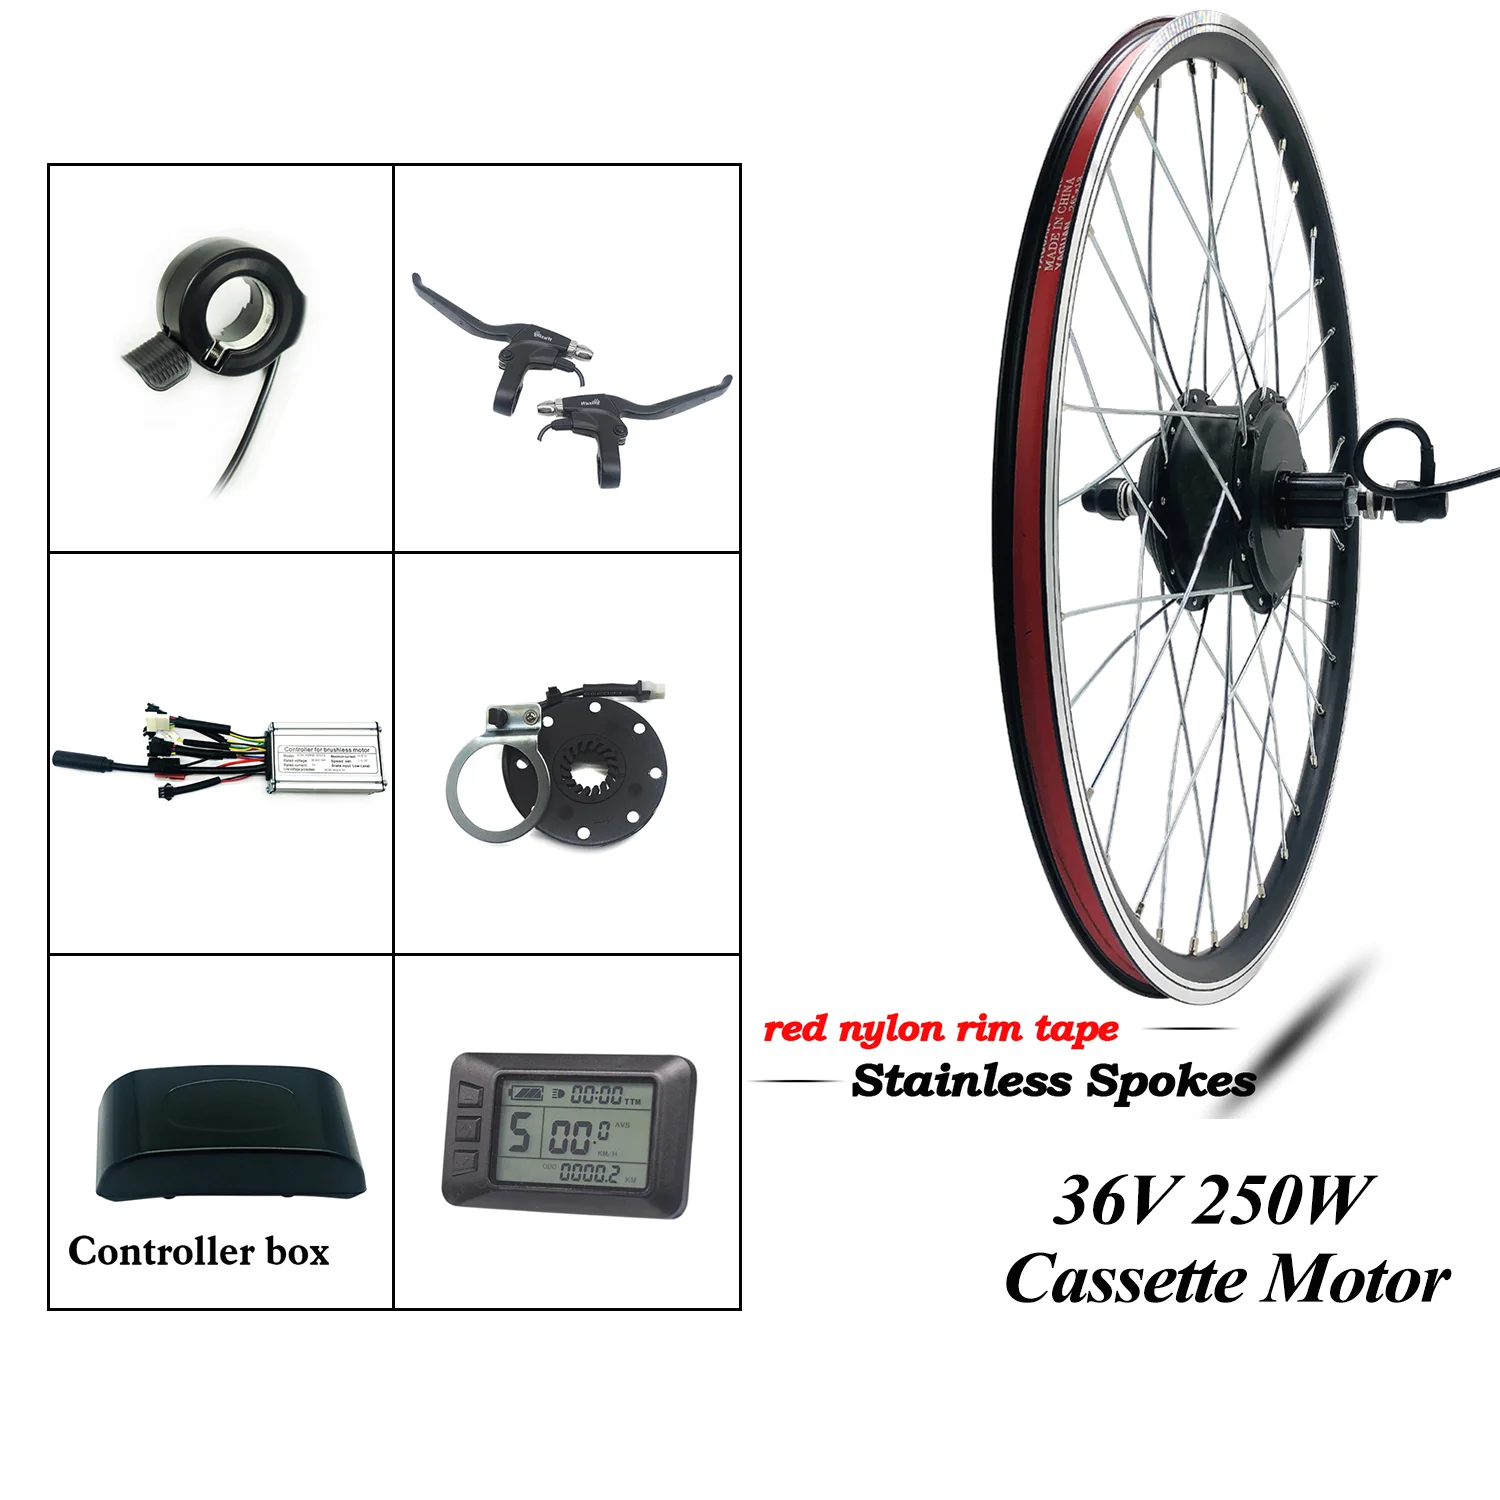 

Greenpedel 20 inch cassette electric bicycle wheel kits 36v 250w electric bicycle bike hub motor kit europe with display